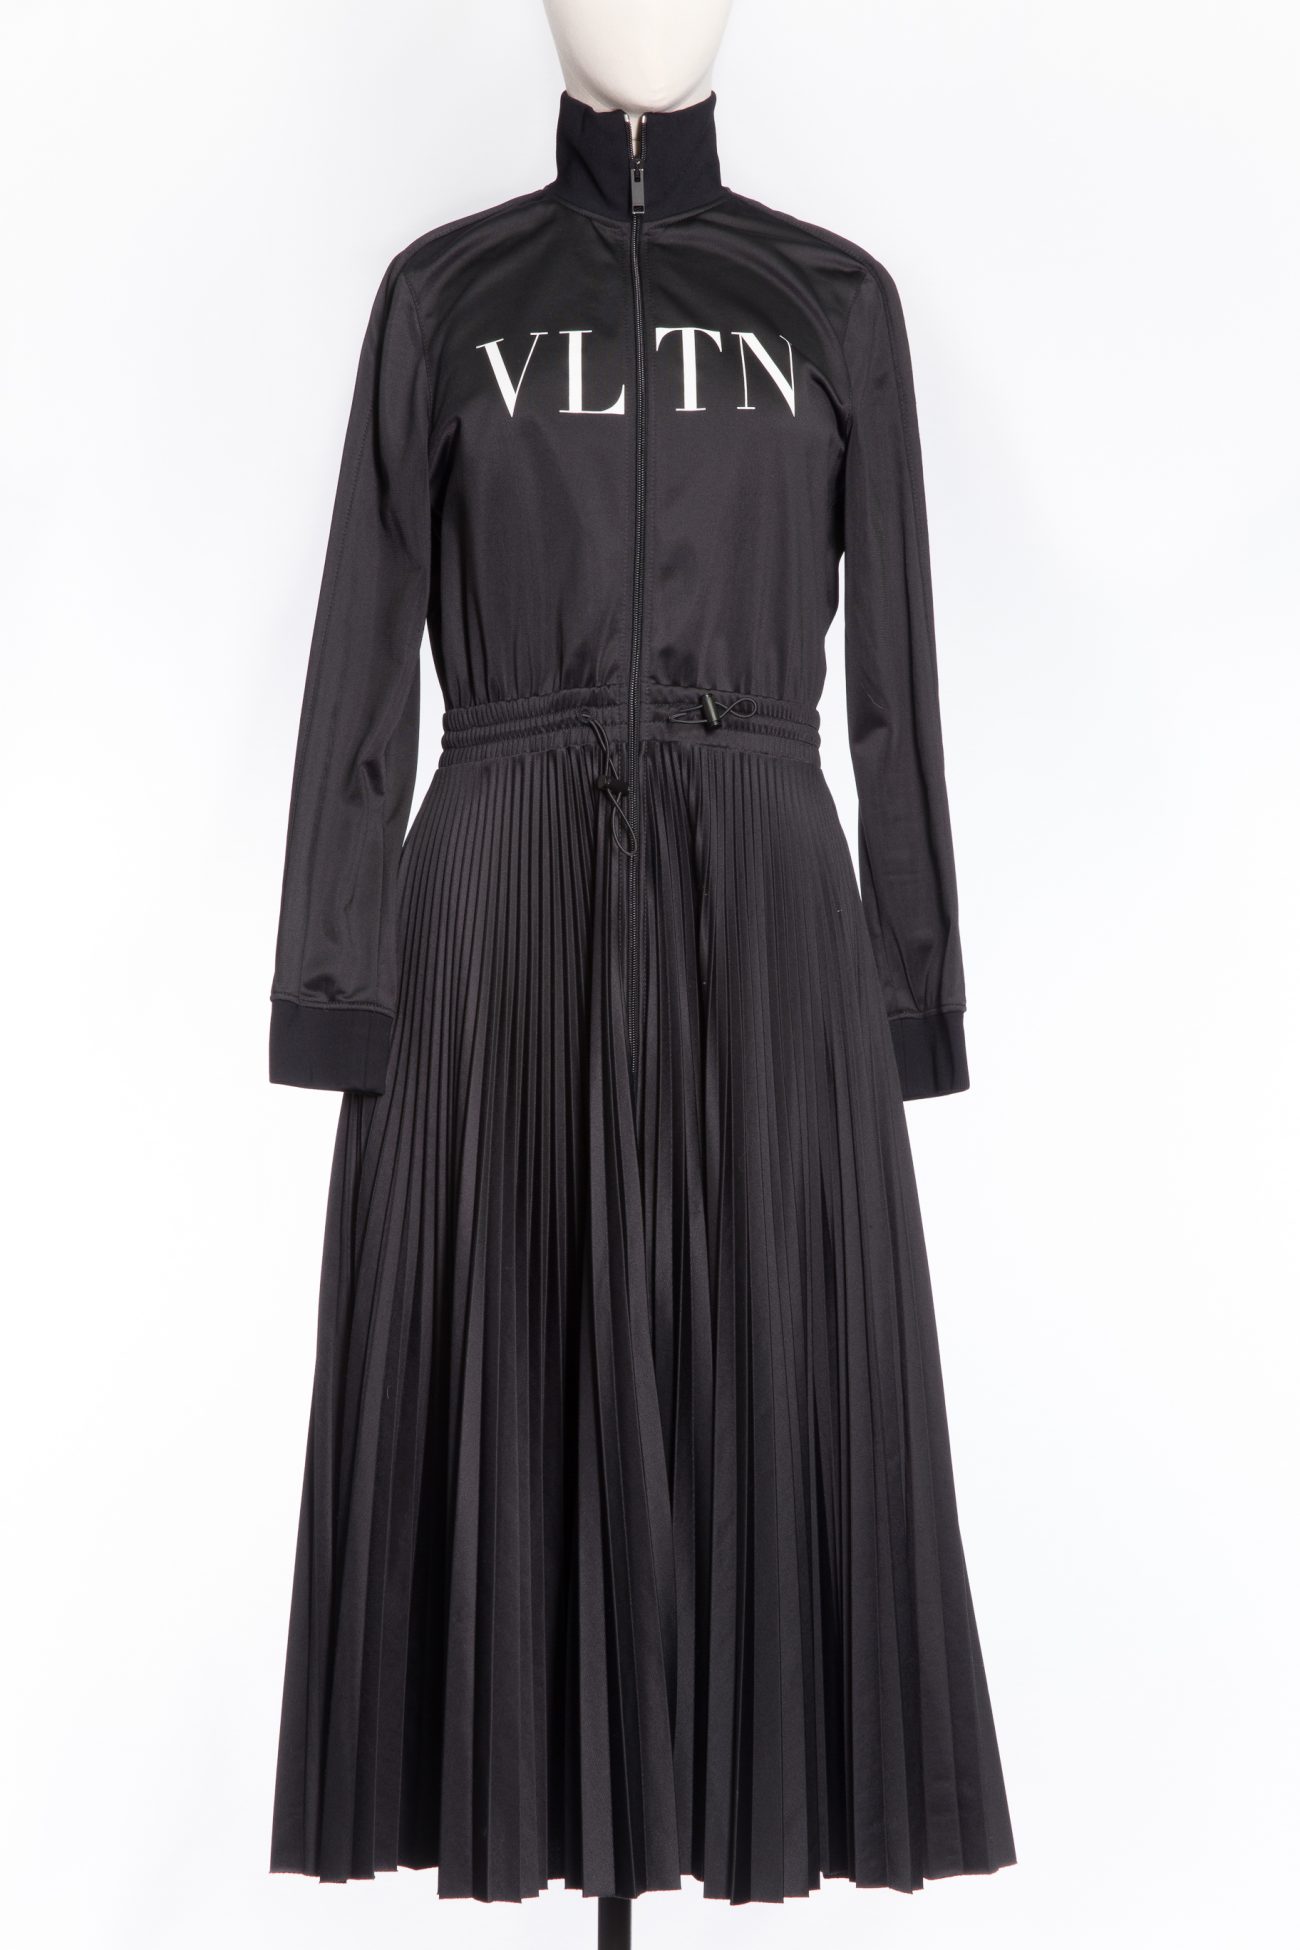 Valentino Spring Summer 2013 – Be Creative | Evening gowns, Couture  dresses, Gowns